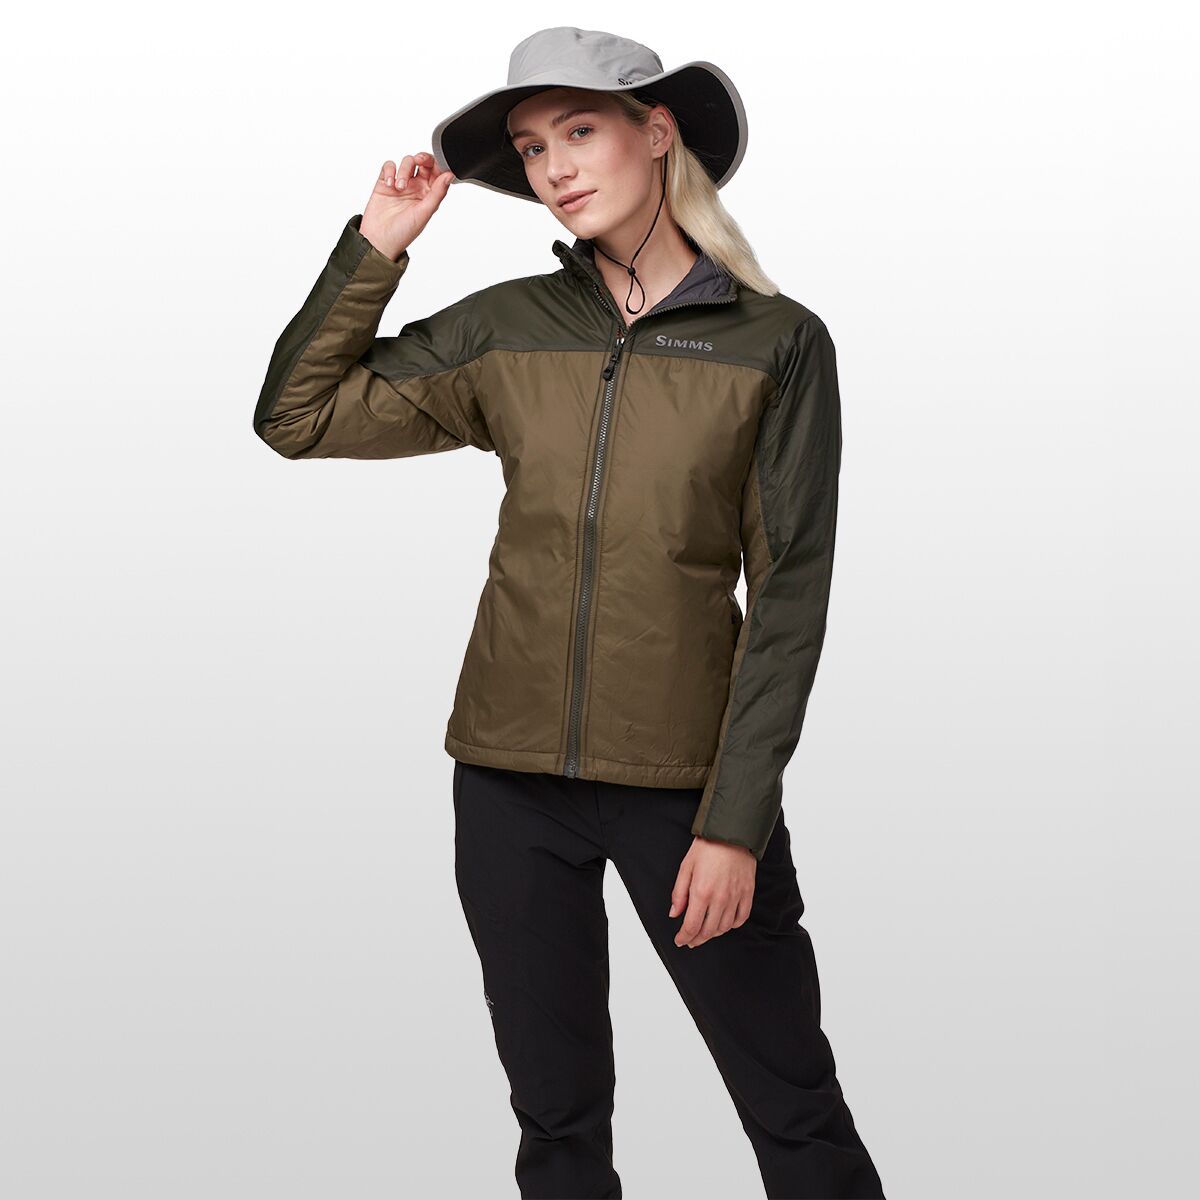 Simms Midstream Insulated Jacket - Women's - Clothing